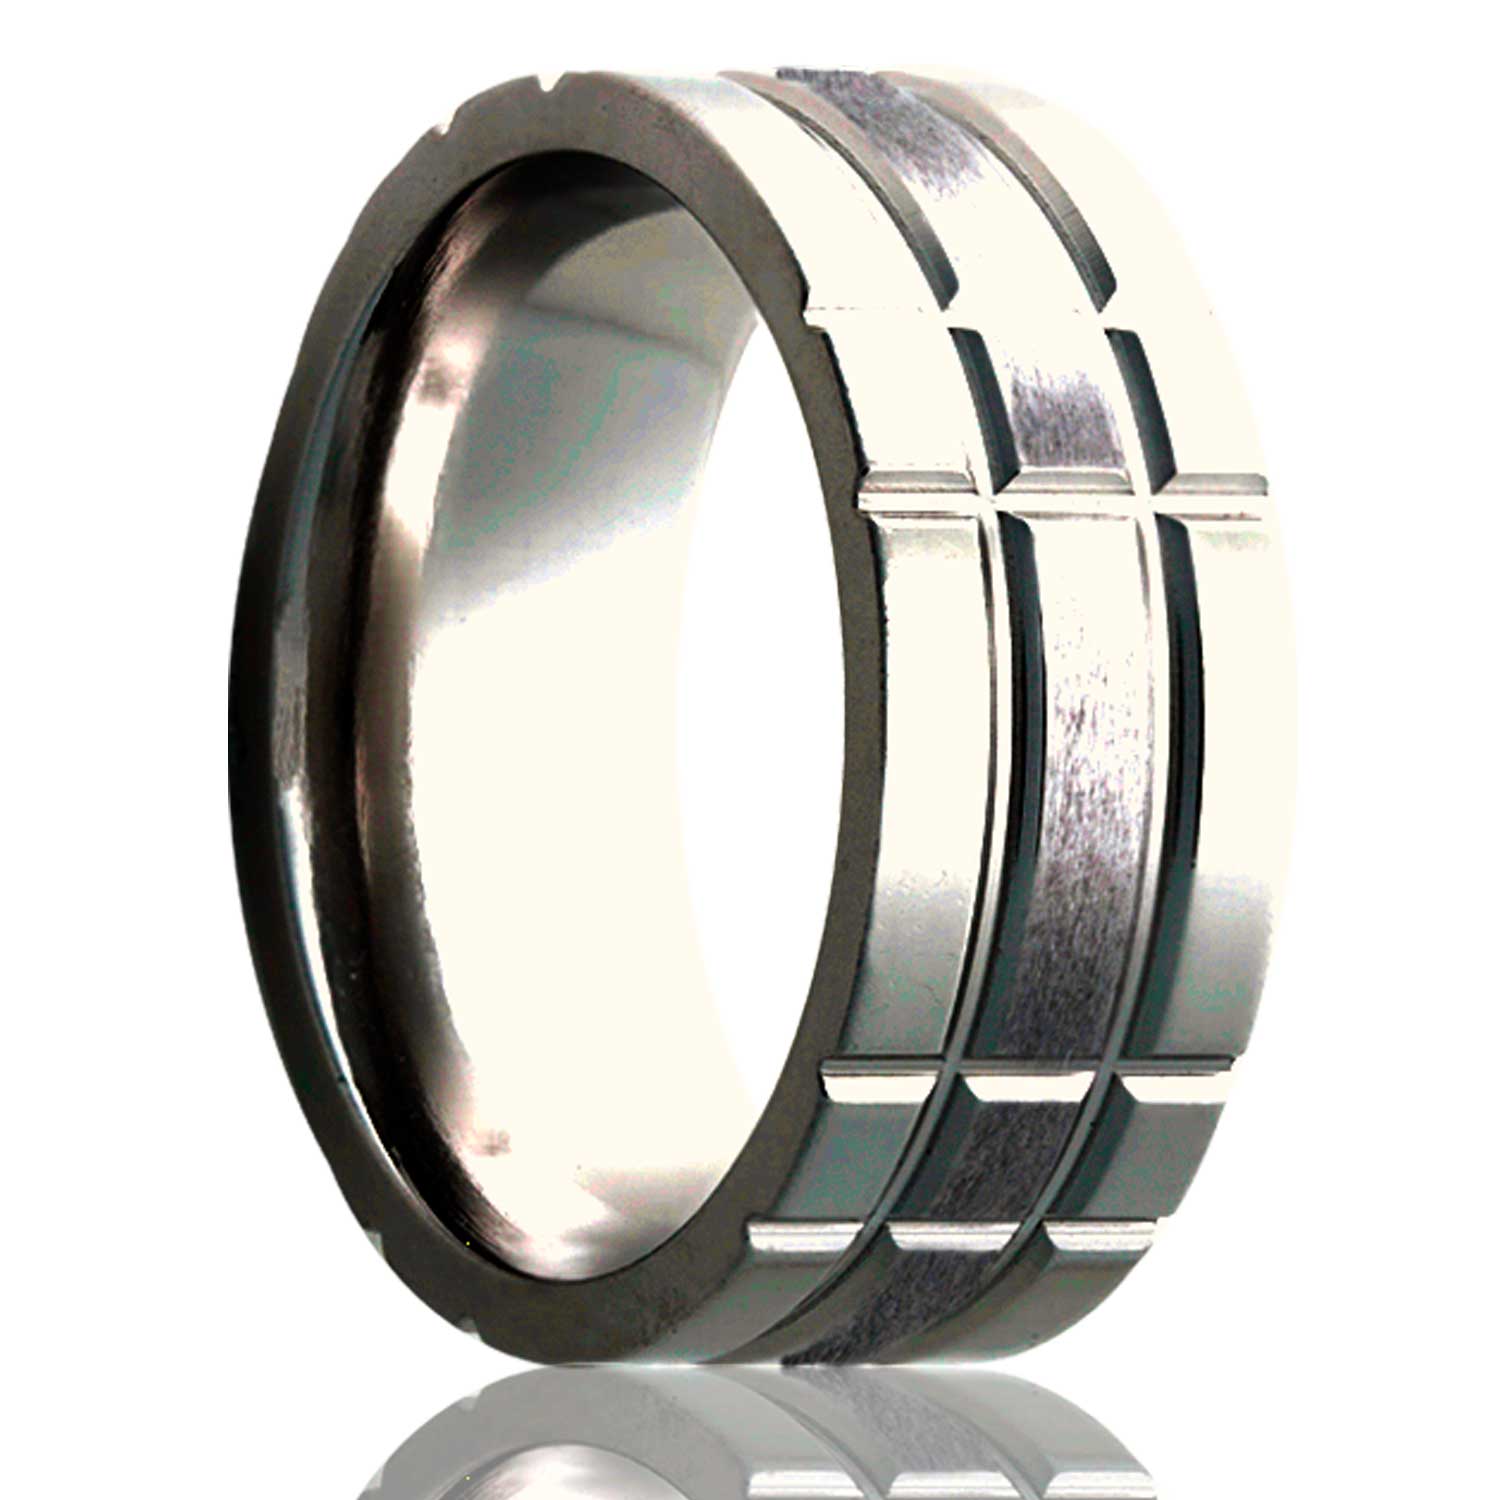 A intersecting grooves satin finish titanium wedding band displayed on a neutral white background.